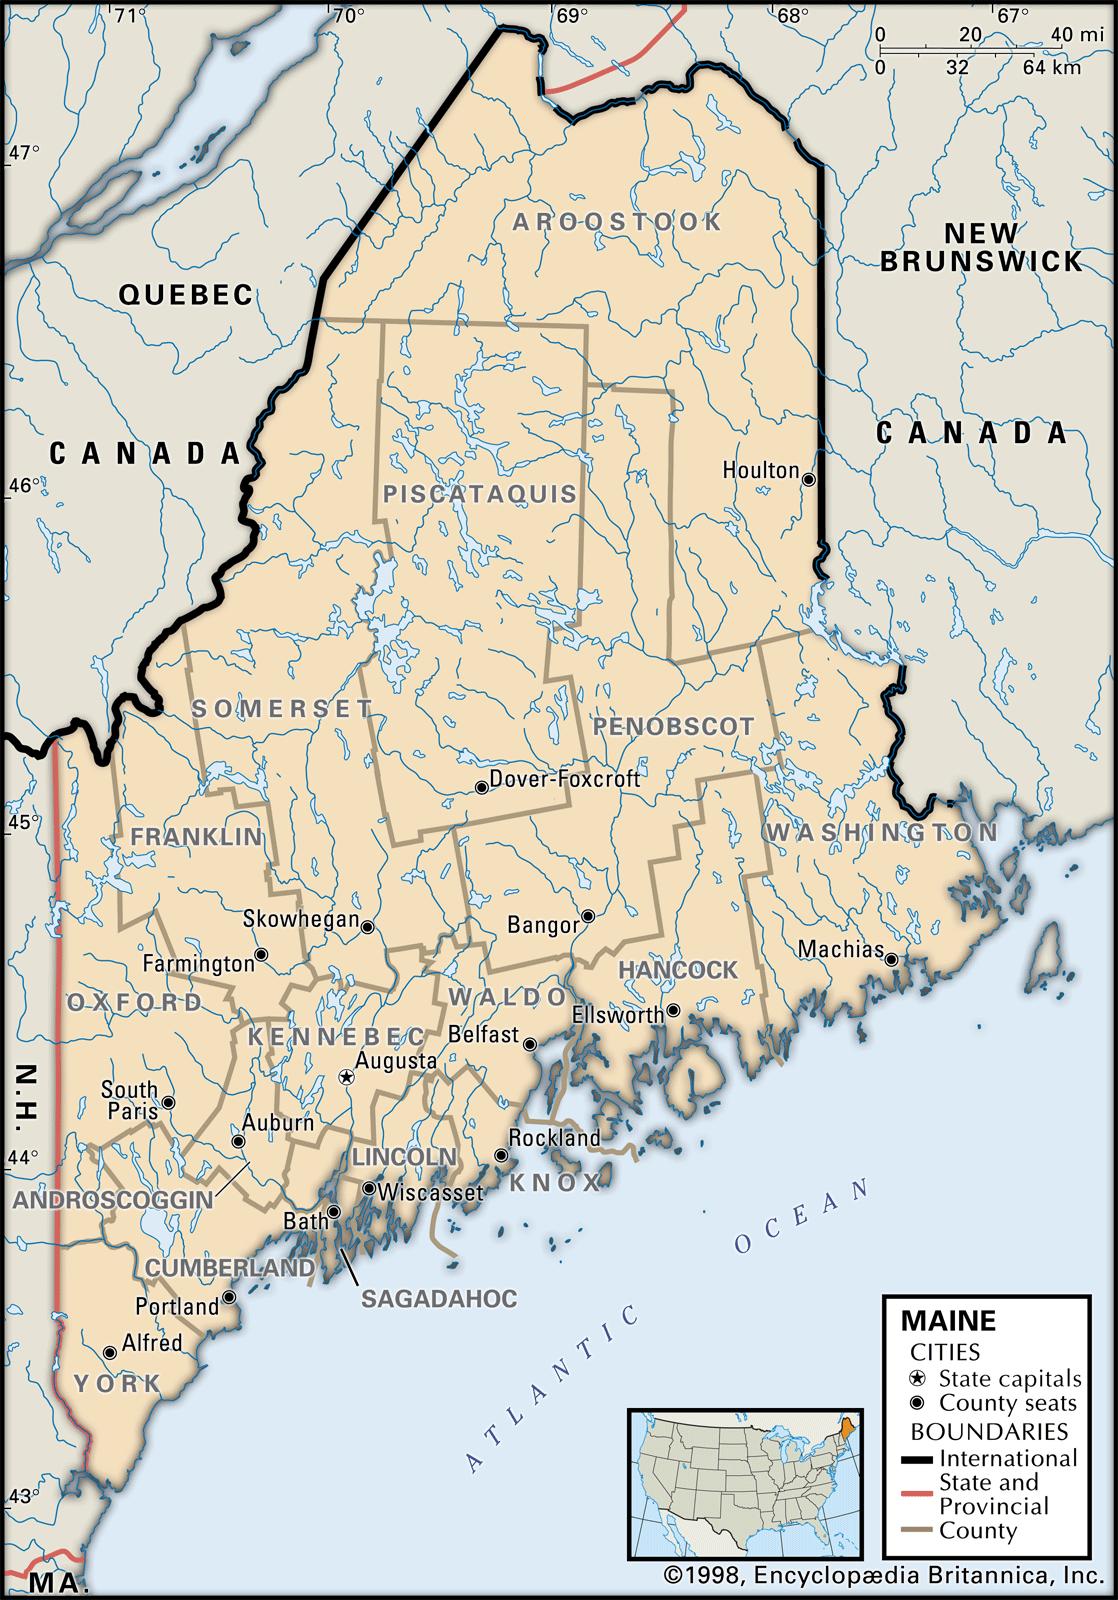 County Map of Maine